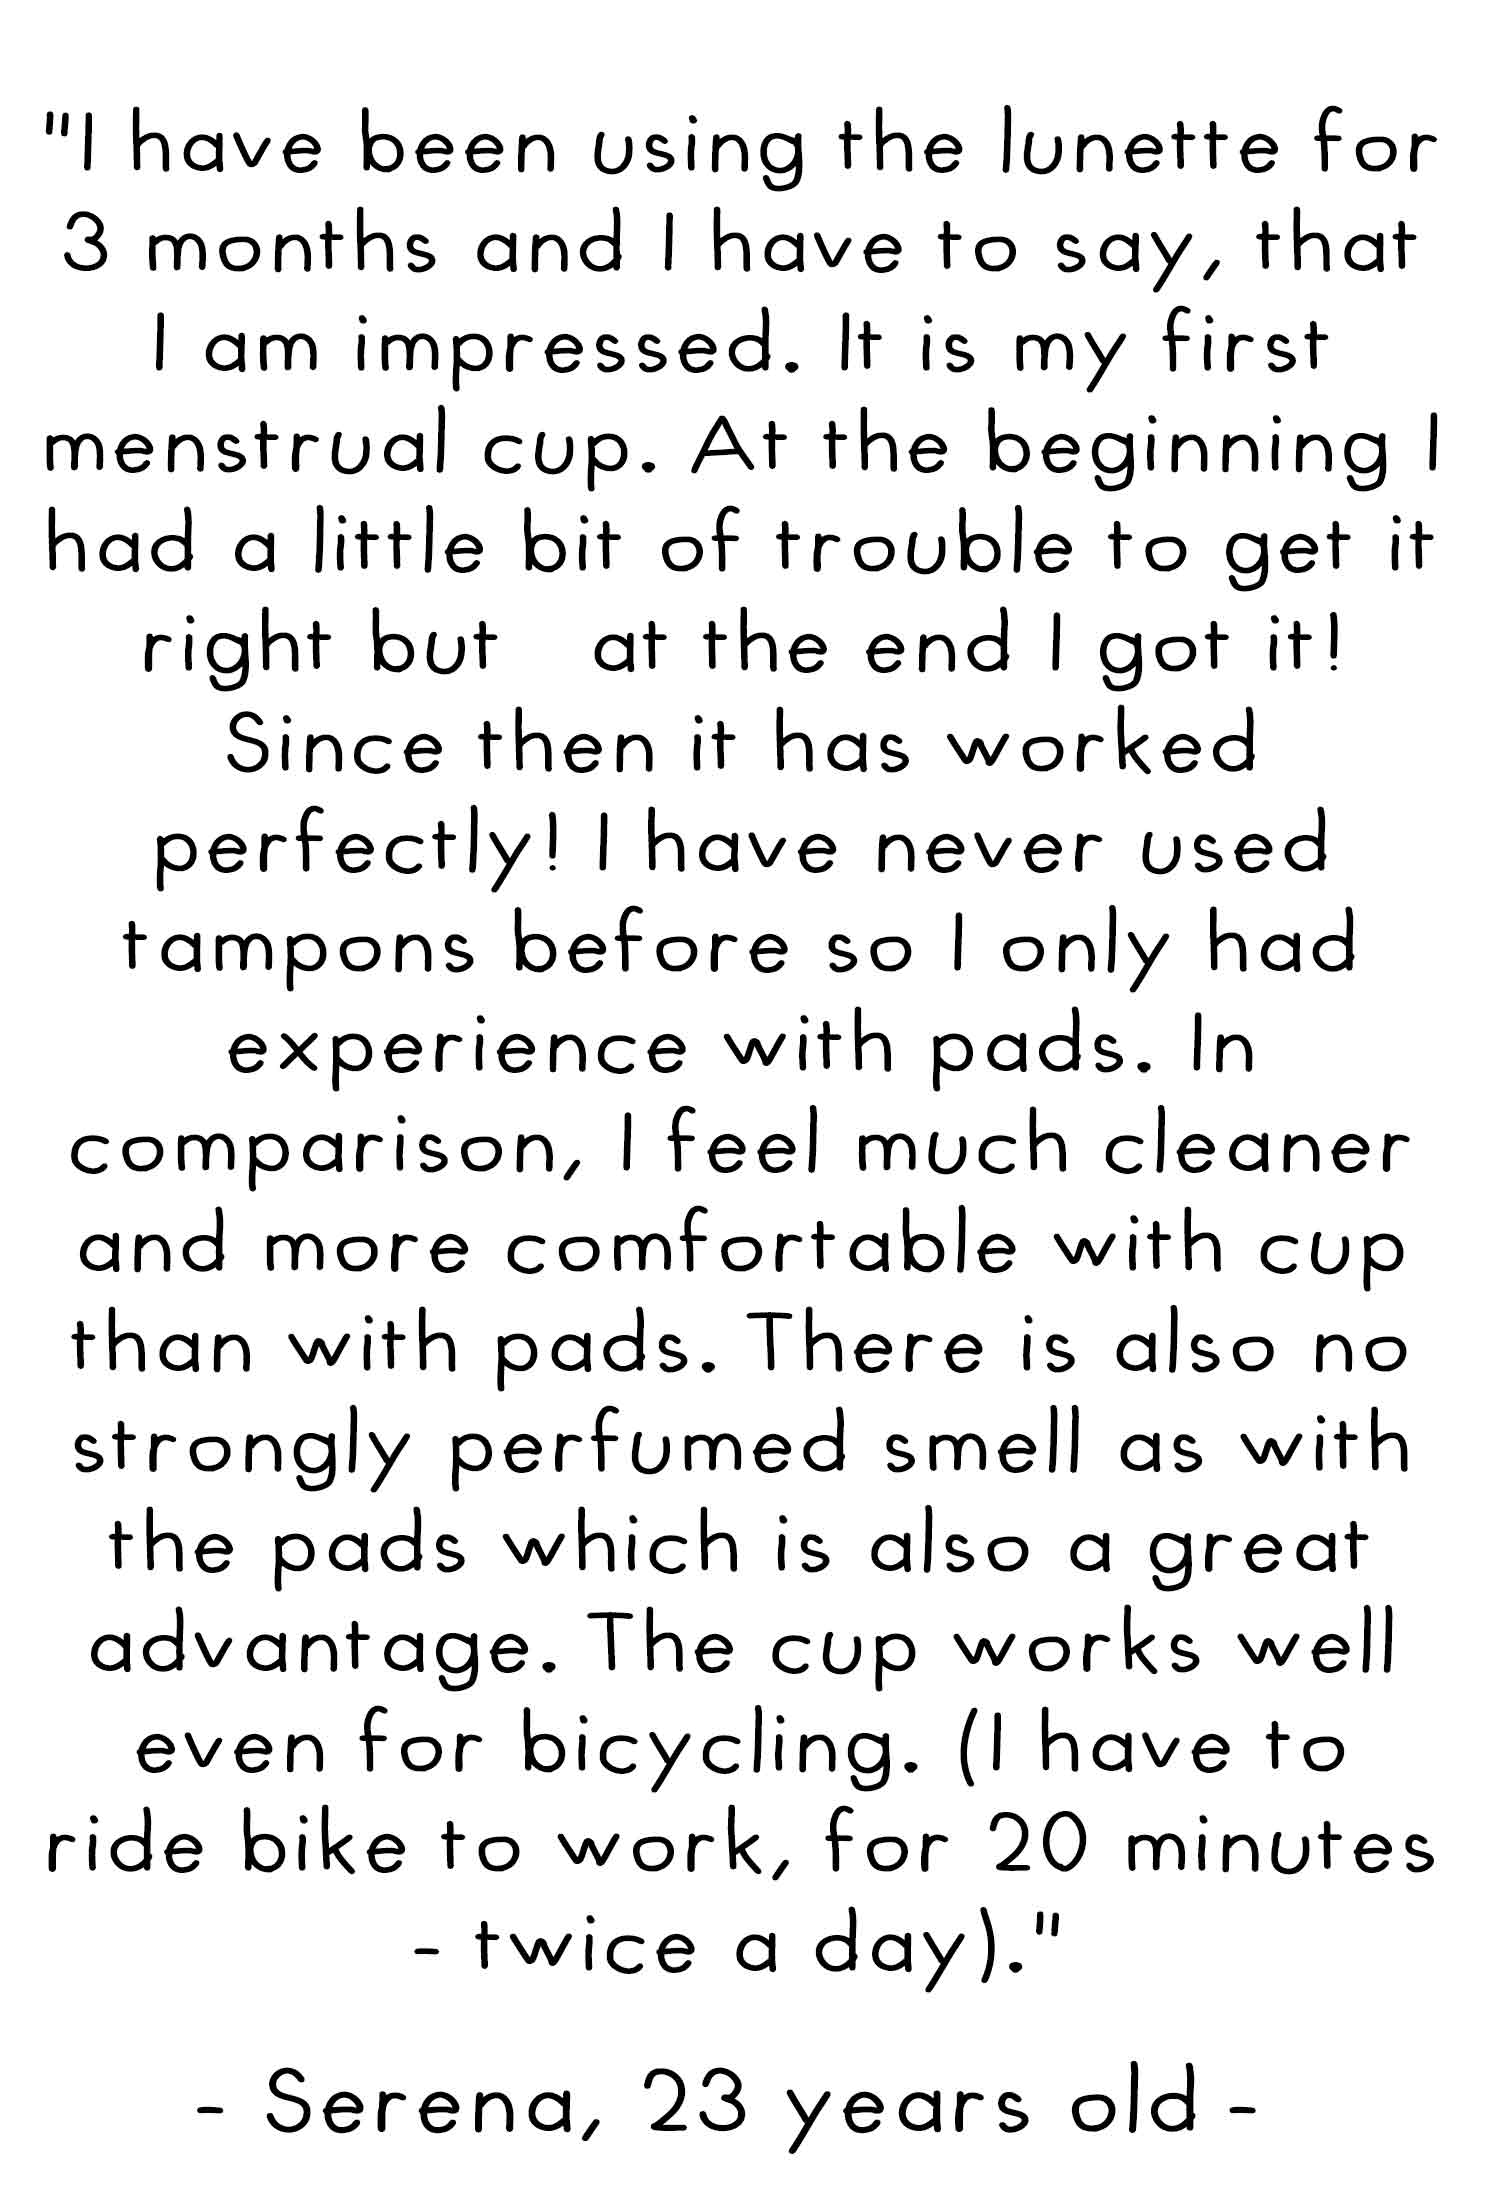 I have been using the lunette for 3 months and I have to say that I am impressed. It is my first menstrual cup. At the beginning I had a little bit of trouble getting it right but at the end I got it! Since then it has worked perfectly! I have never used 